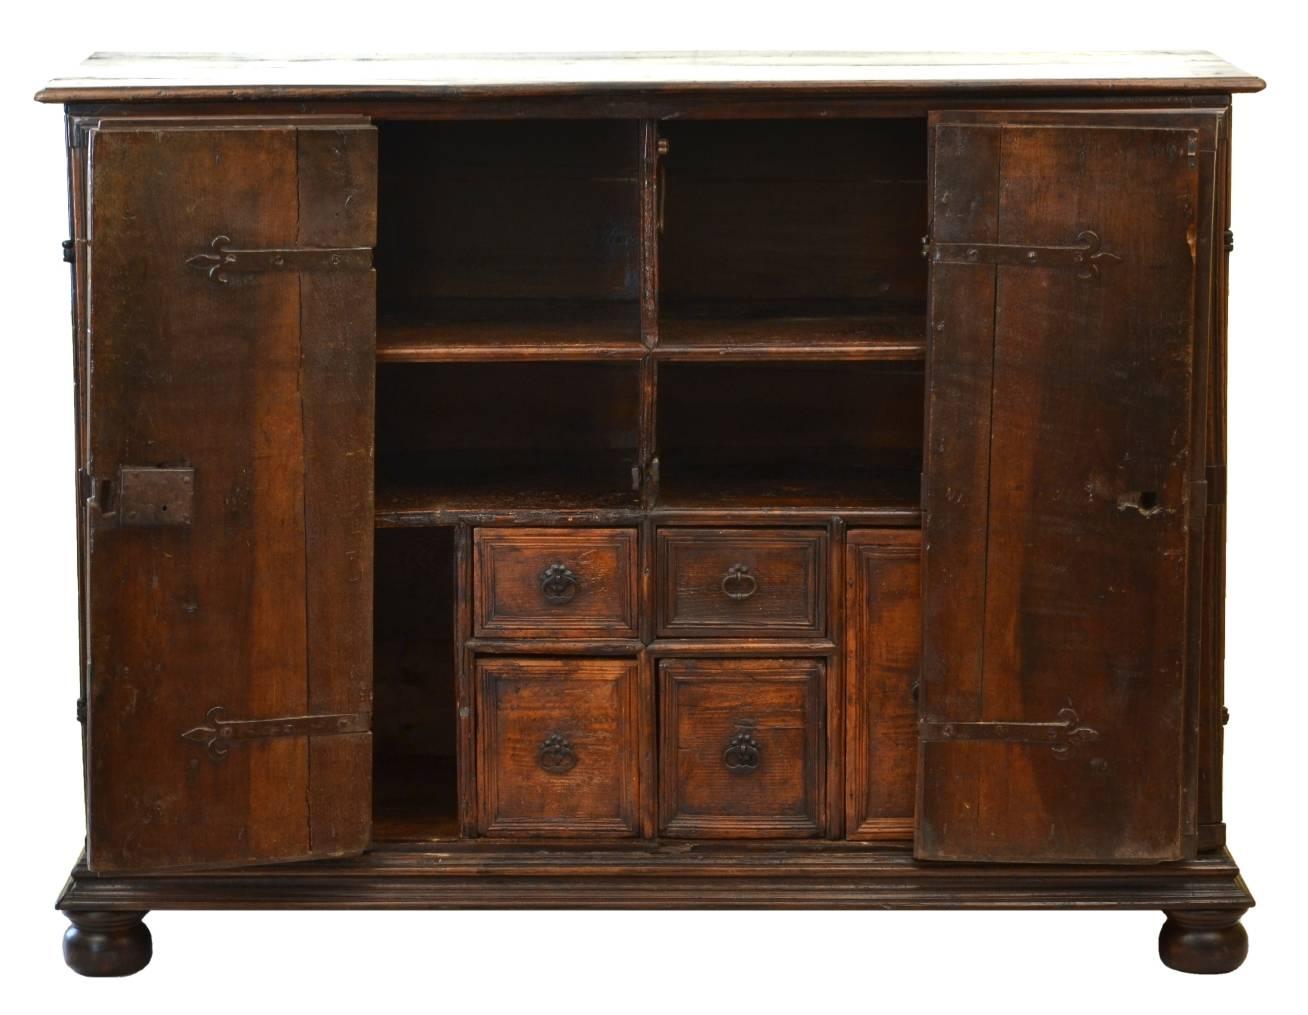 17th century Italian walnut credenza, the rectangular top over the bi-fold doors, each with lozenge molding and wrought iron strap-work; the interior fitted with shelves and drawers, on replaced bun feet.

This credenza has beautiful color and